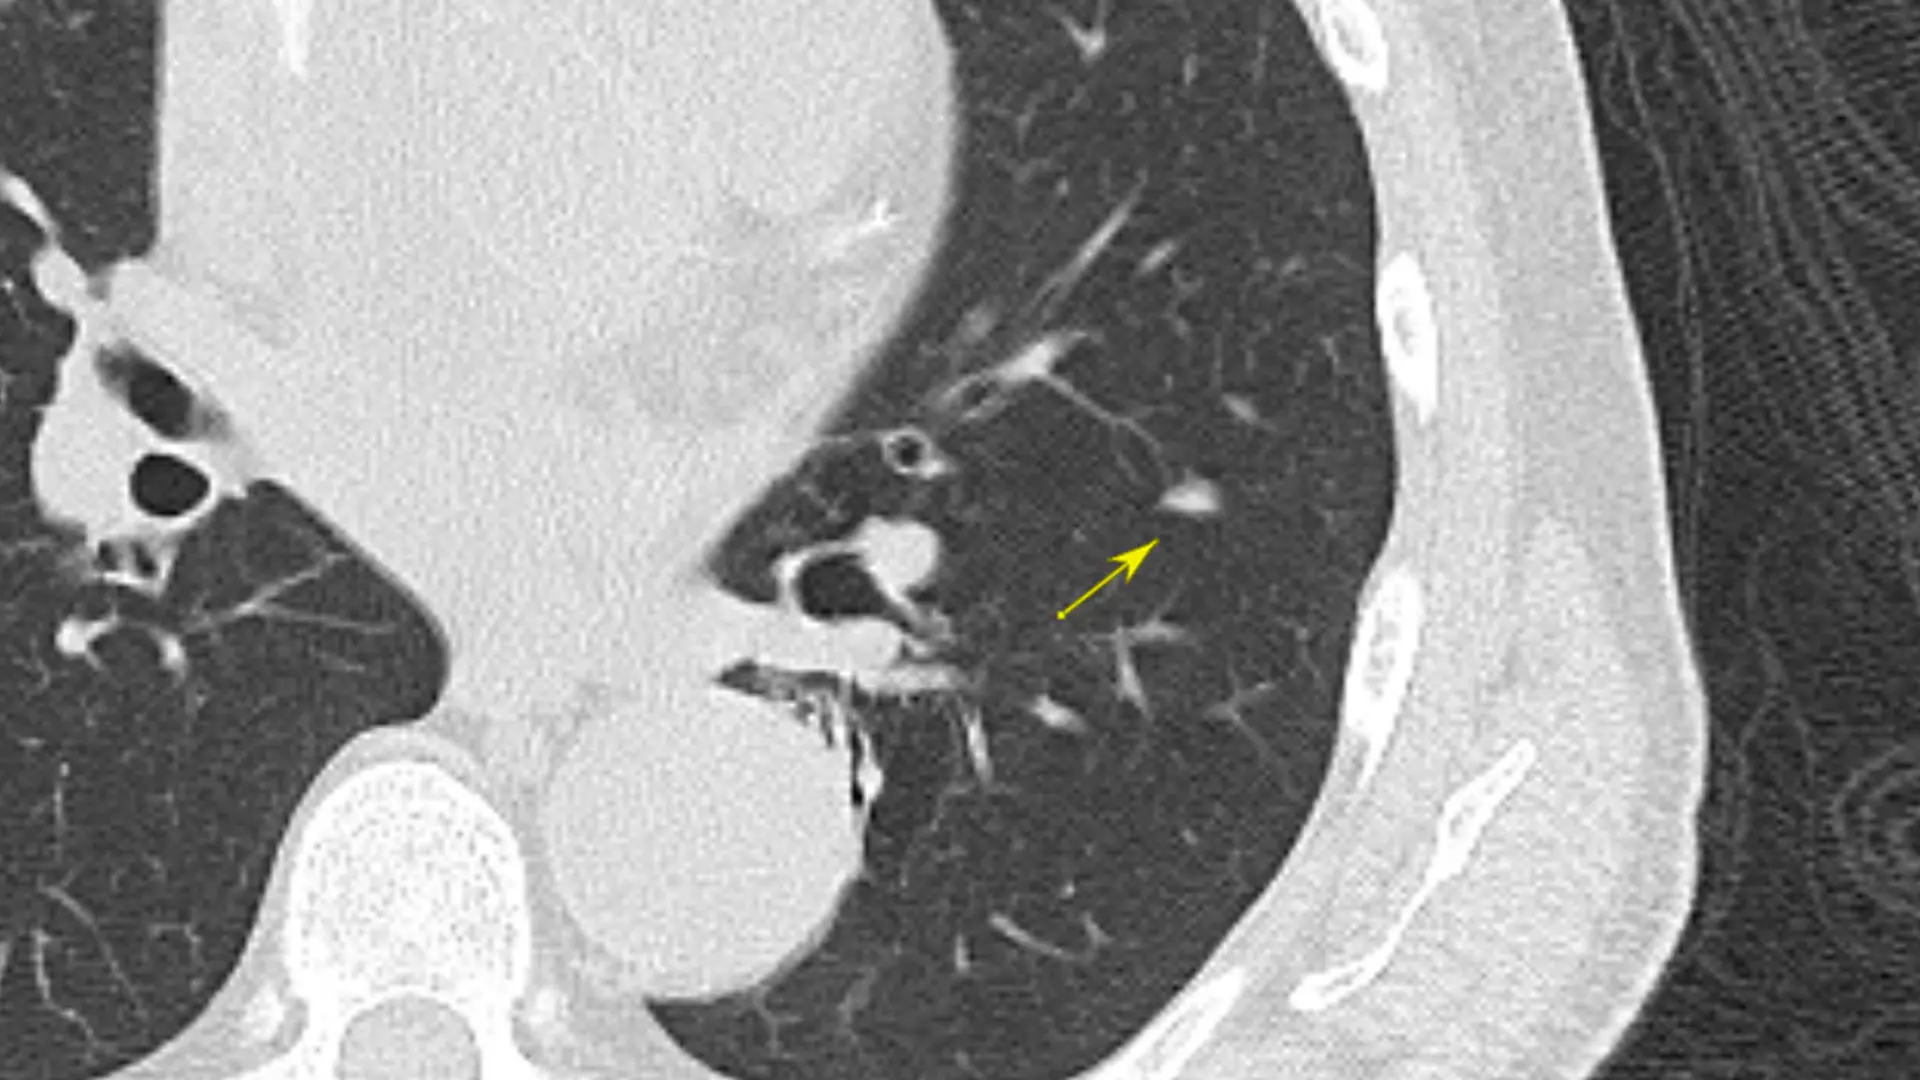 Triangular solid nodule: most likely a lymph node. The triangular shape and the location in the major fissure are characteristic of benign nodules.